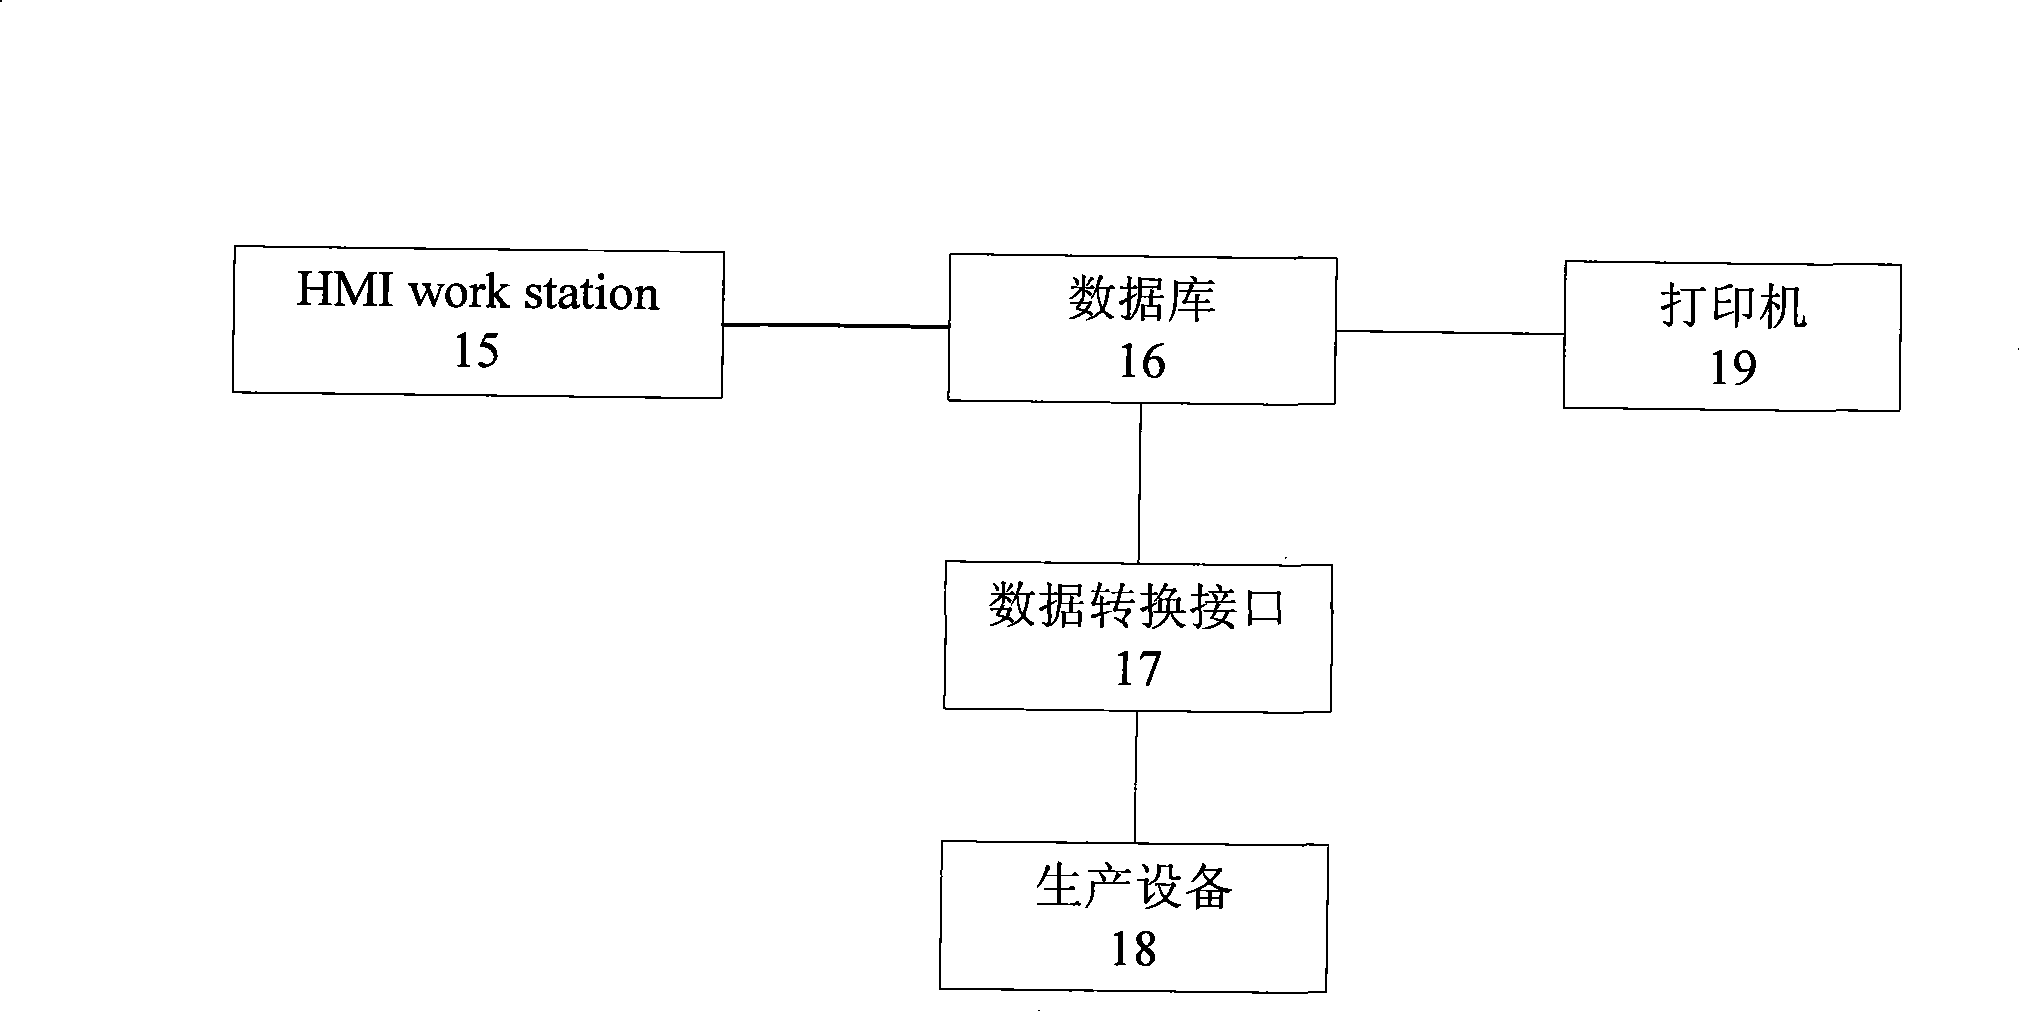 Control method for production according to self-defined production original record